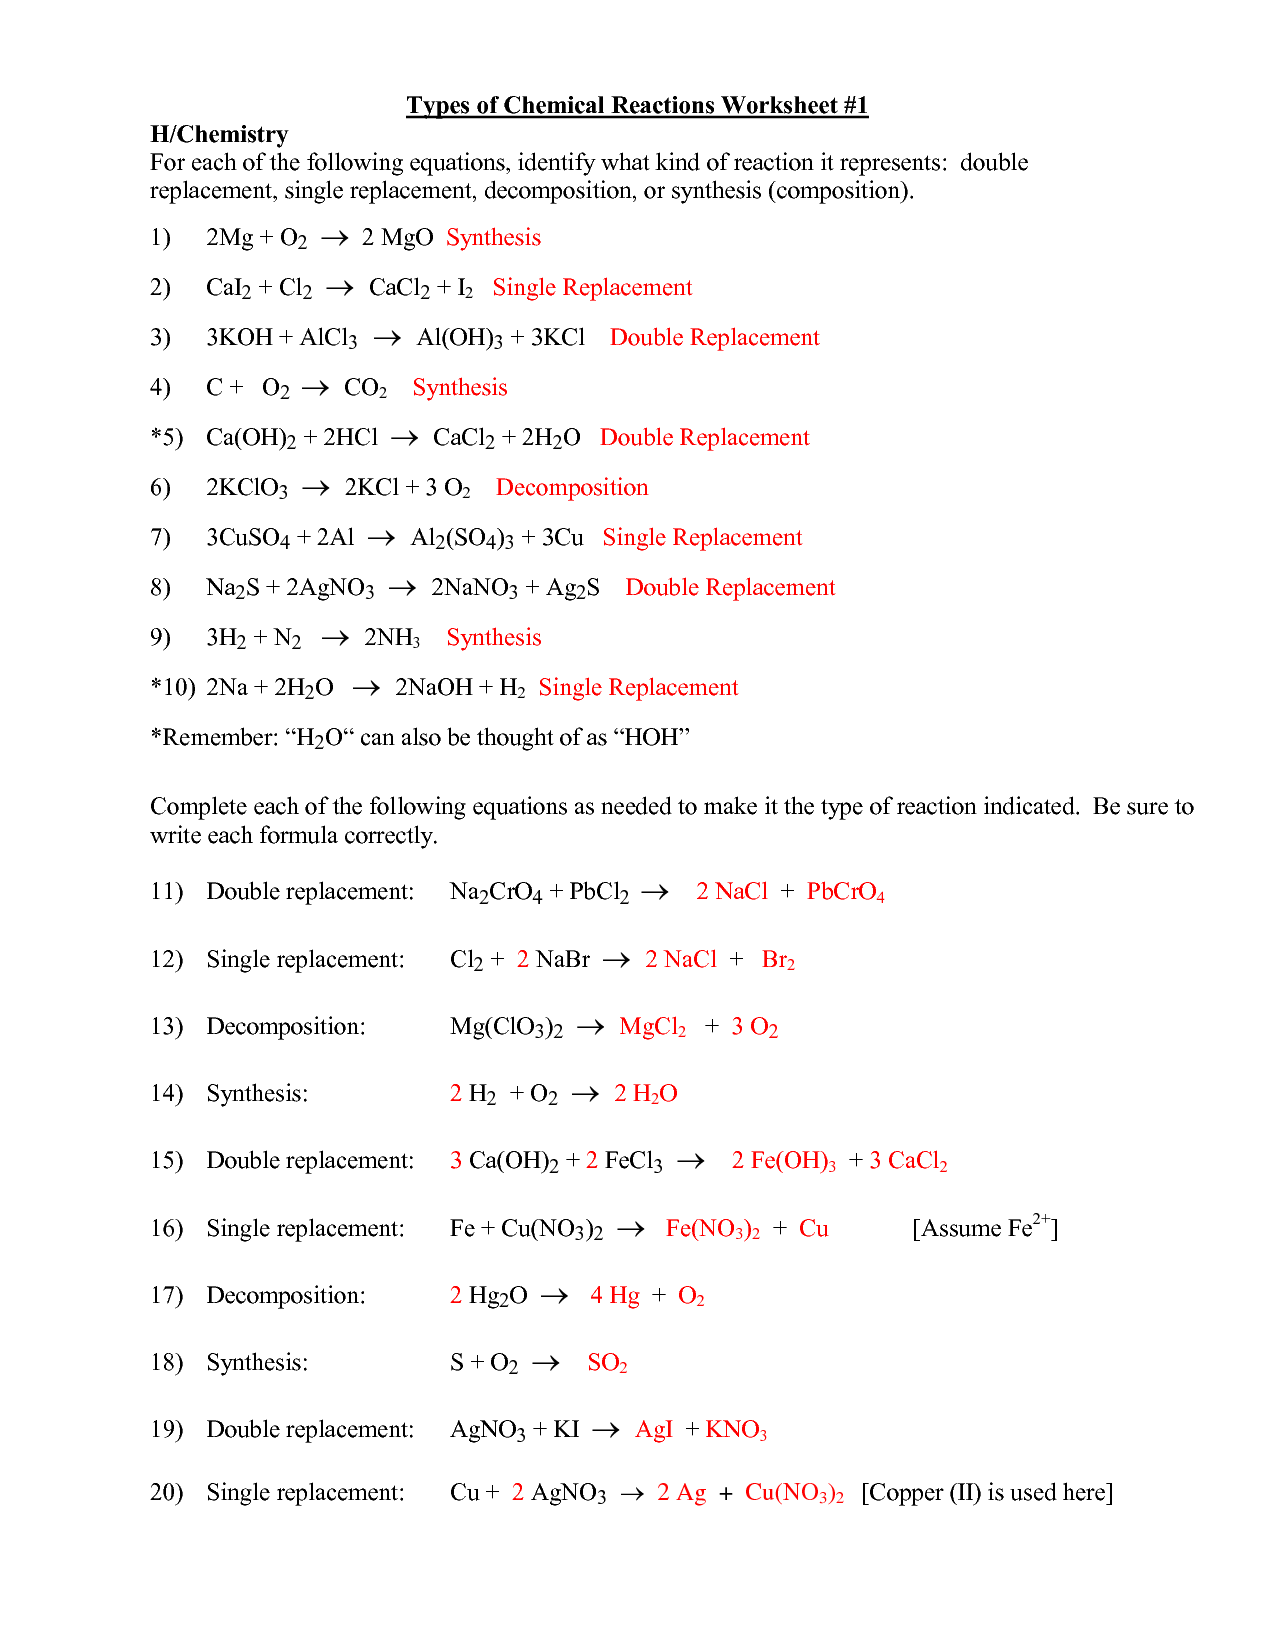 types-of-chemical-reactions-worksheet-writing-formulas-answers-writing-worksheets